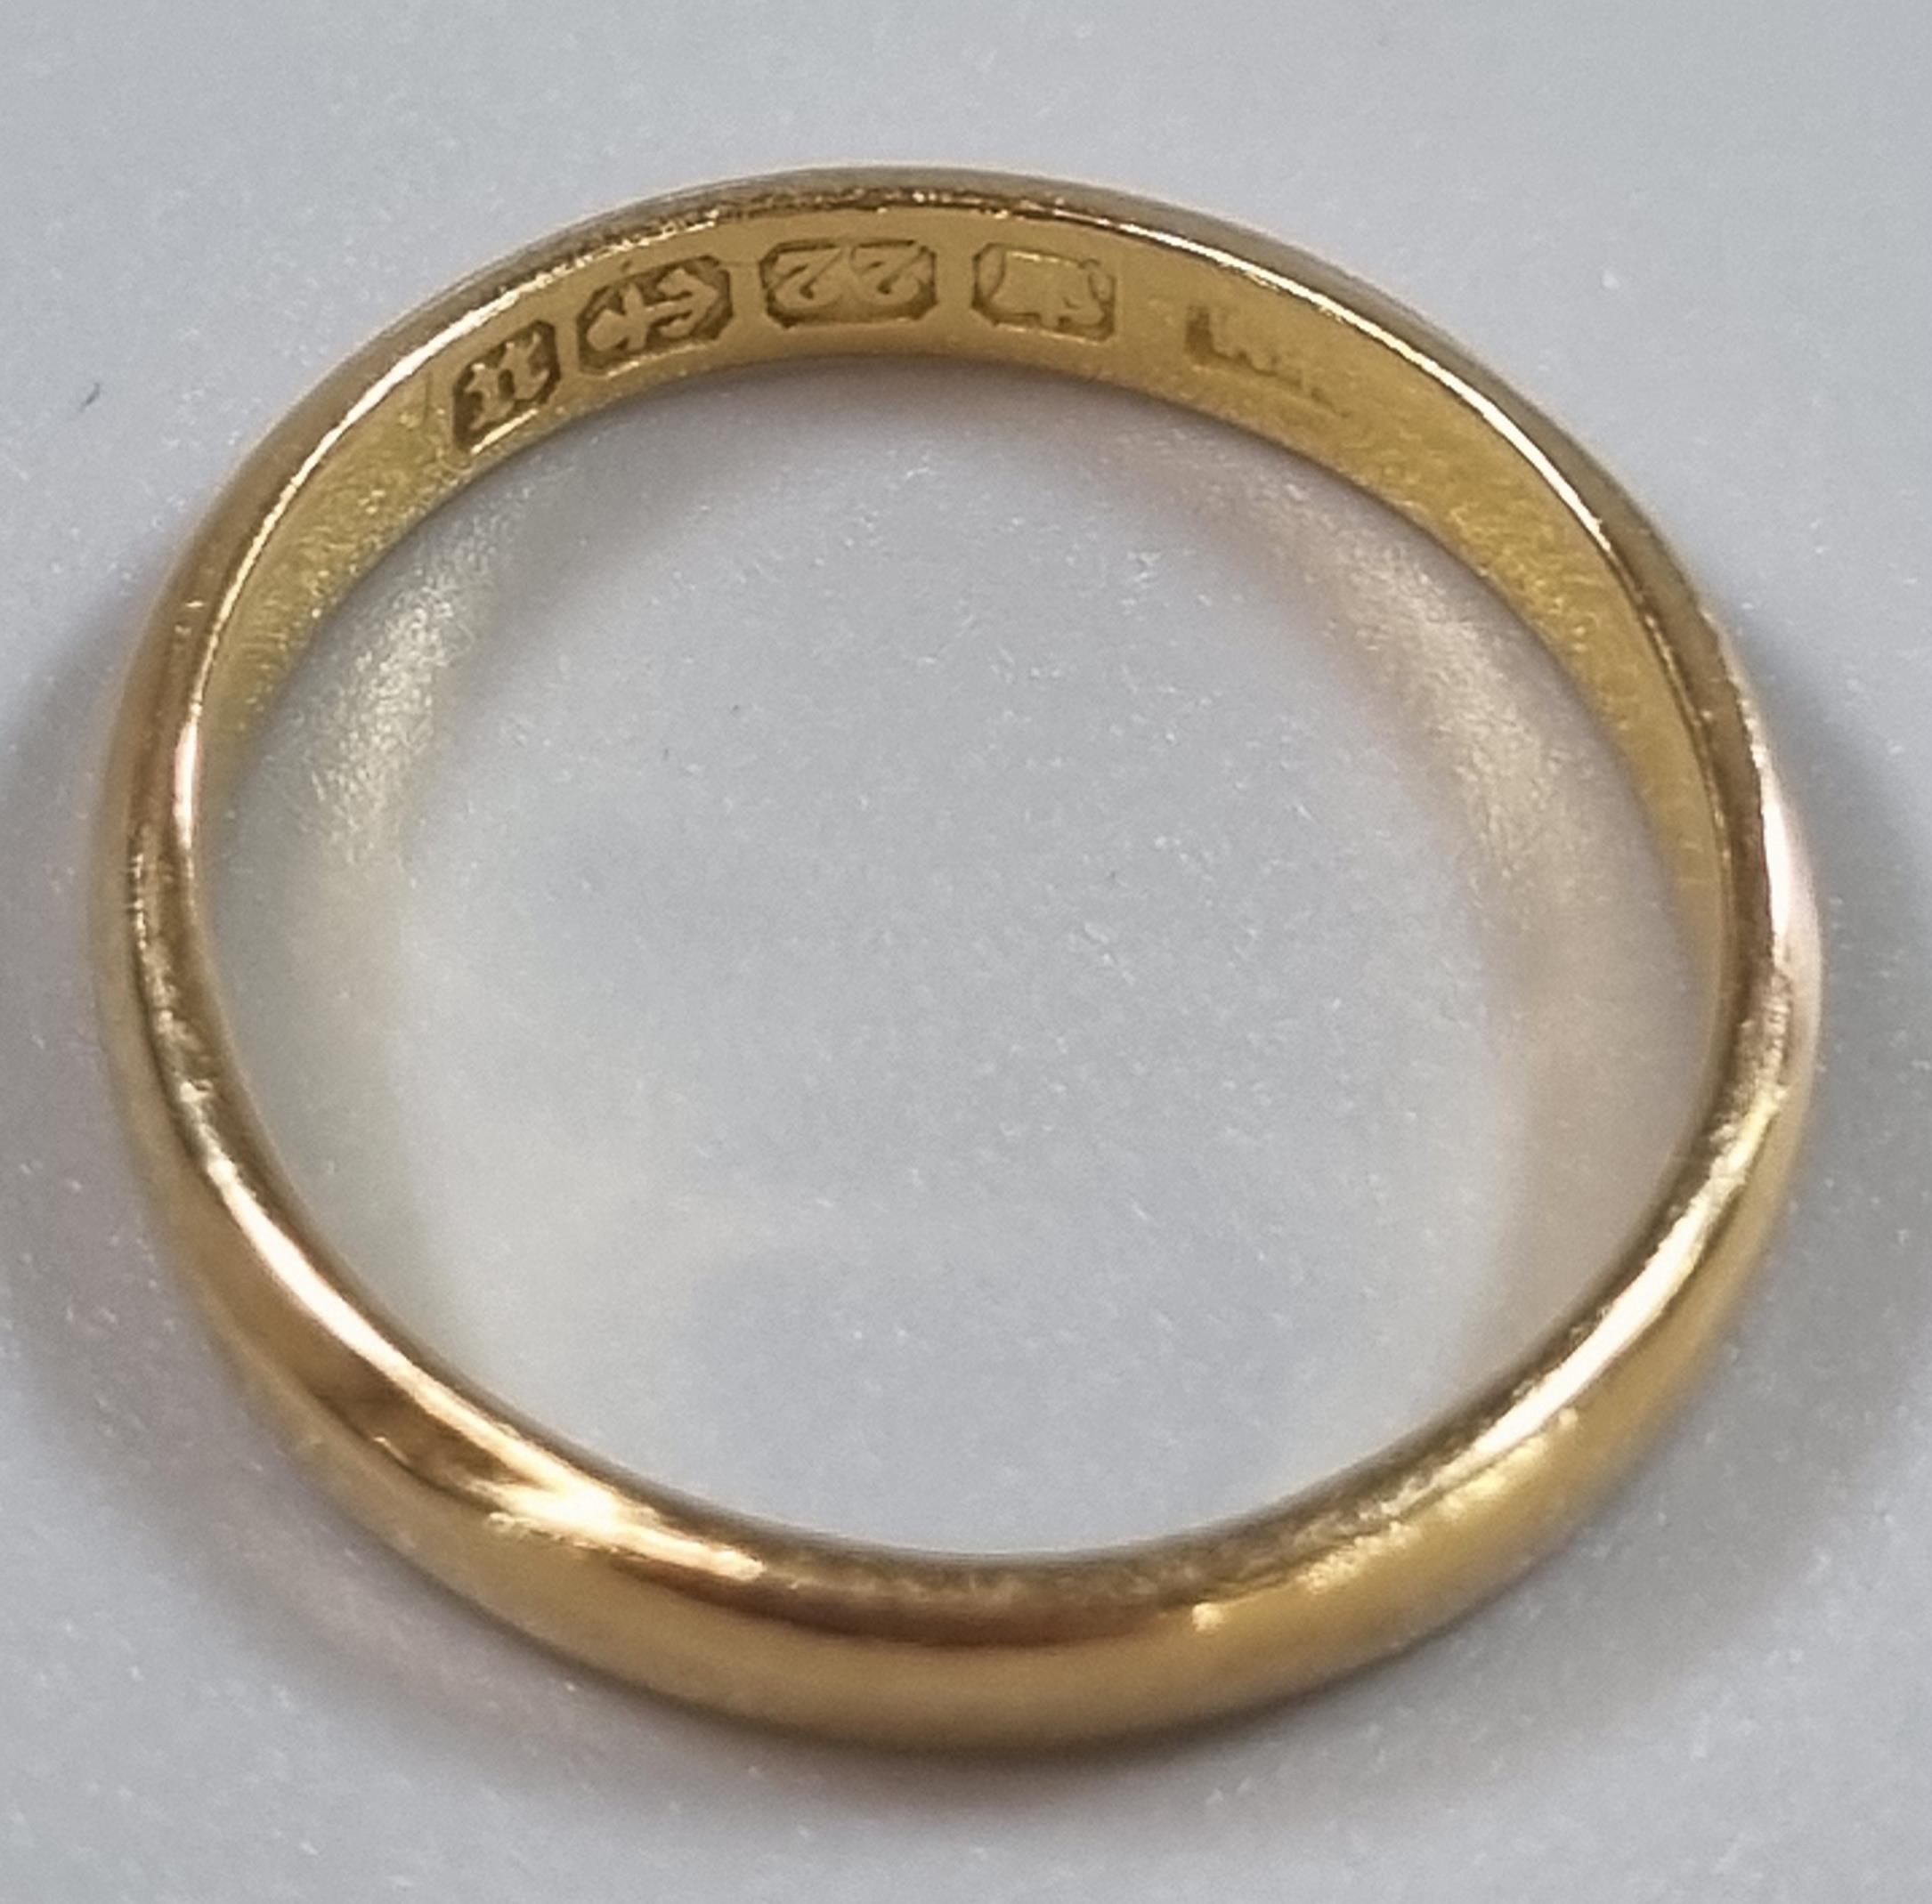 22ct gold wedding band. 2.8g approx. Size N. (B.P. 21% + VAT) - Image 3 of 4